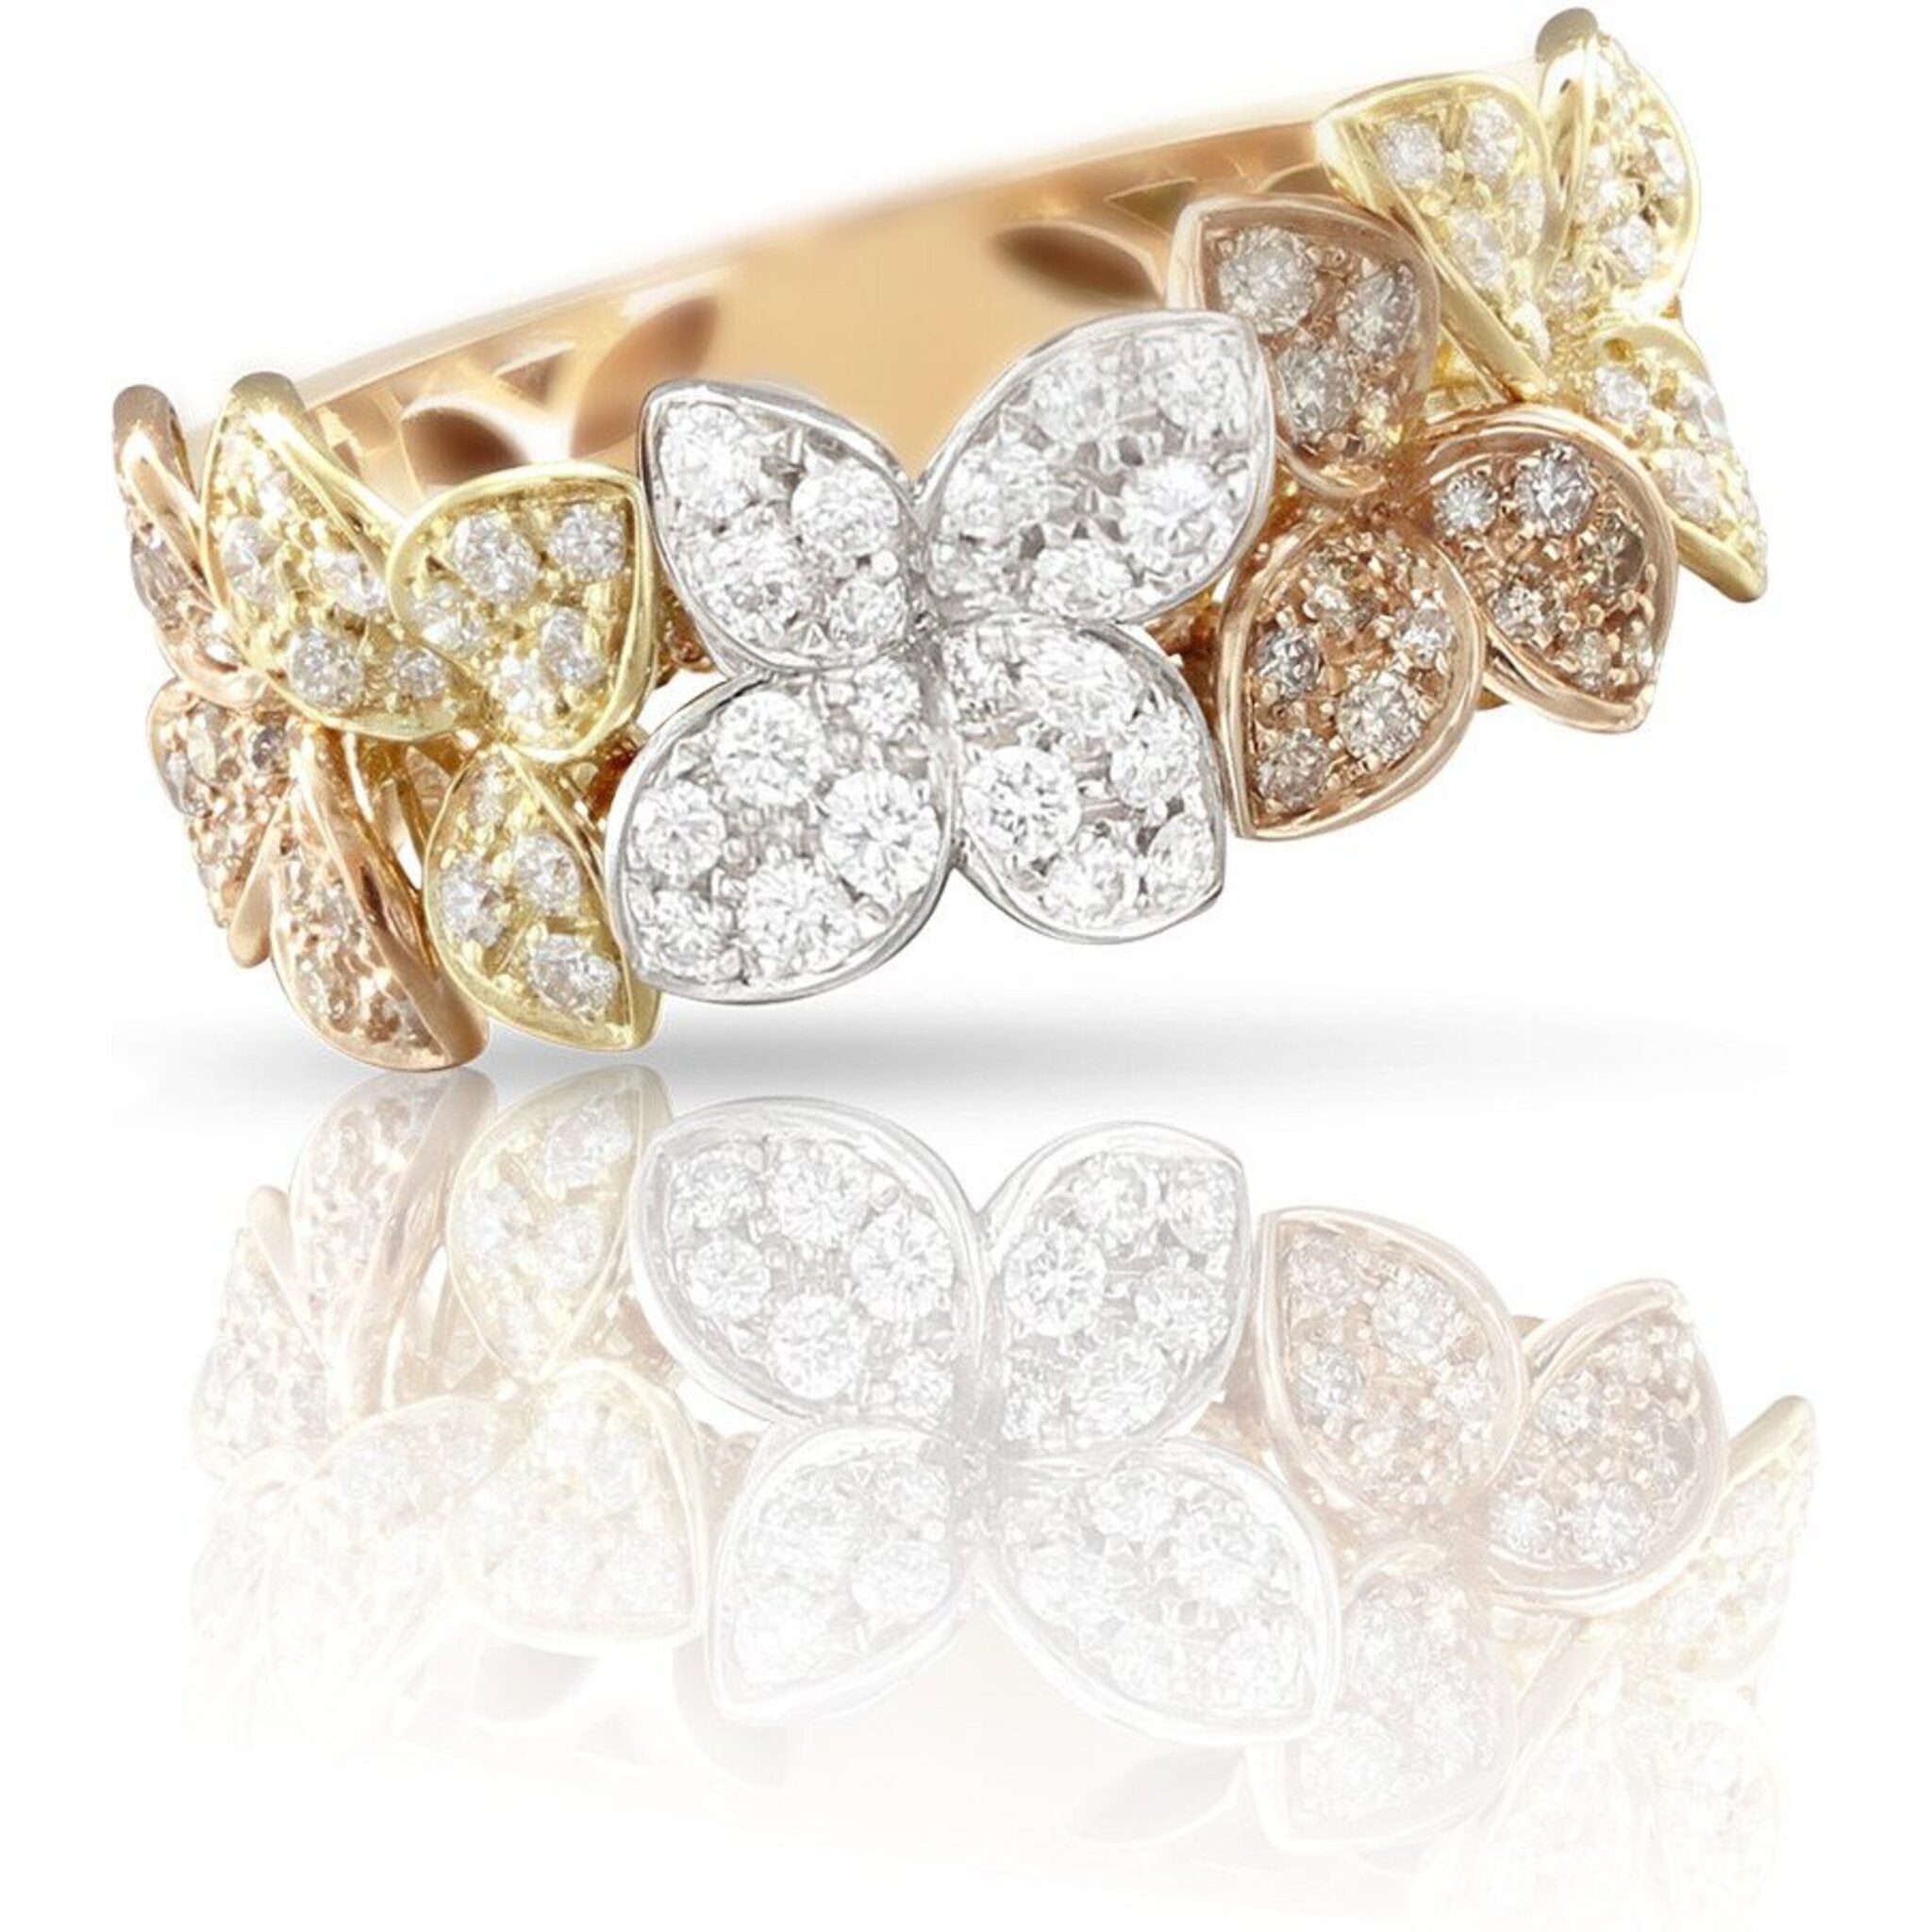 Pasquale Bruni - Ama Ring in 18K Rose, White and Yellow Gold with White and Champagne Diamonds 15 / Size 7 US